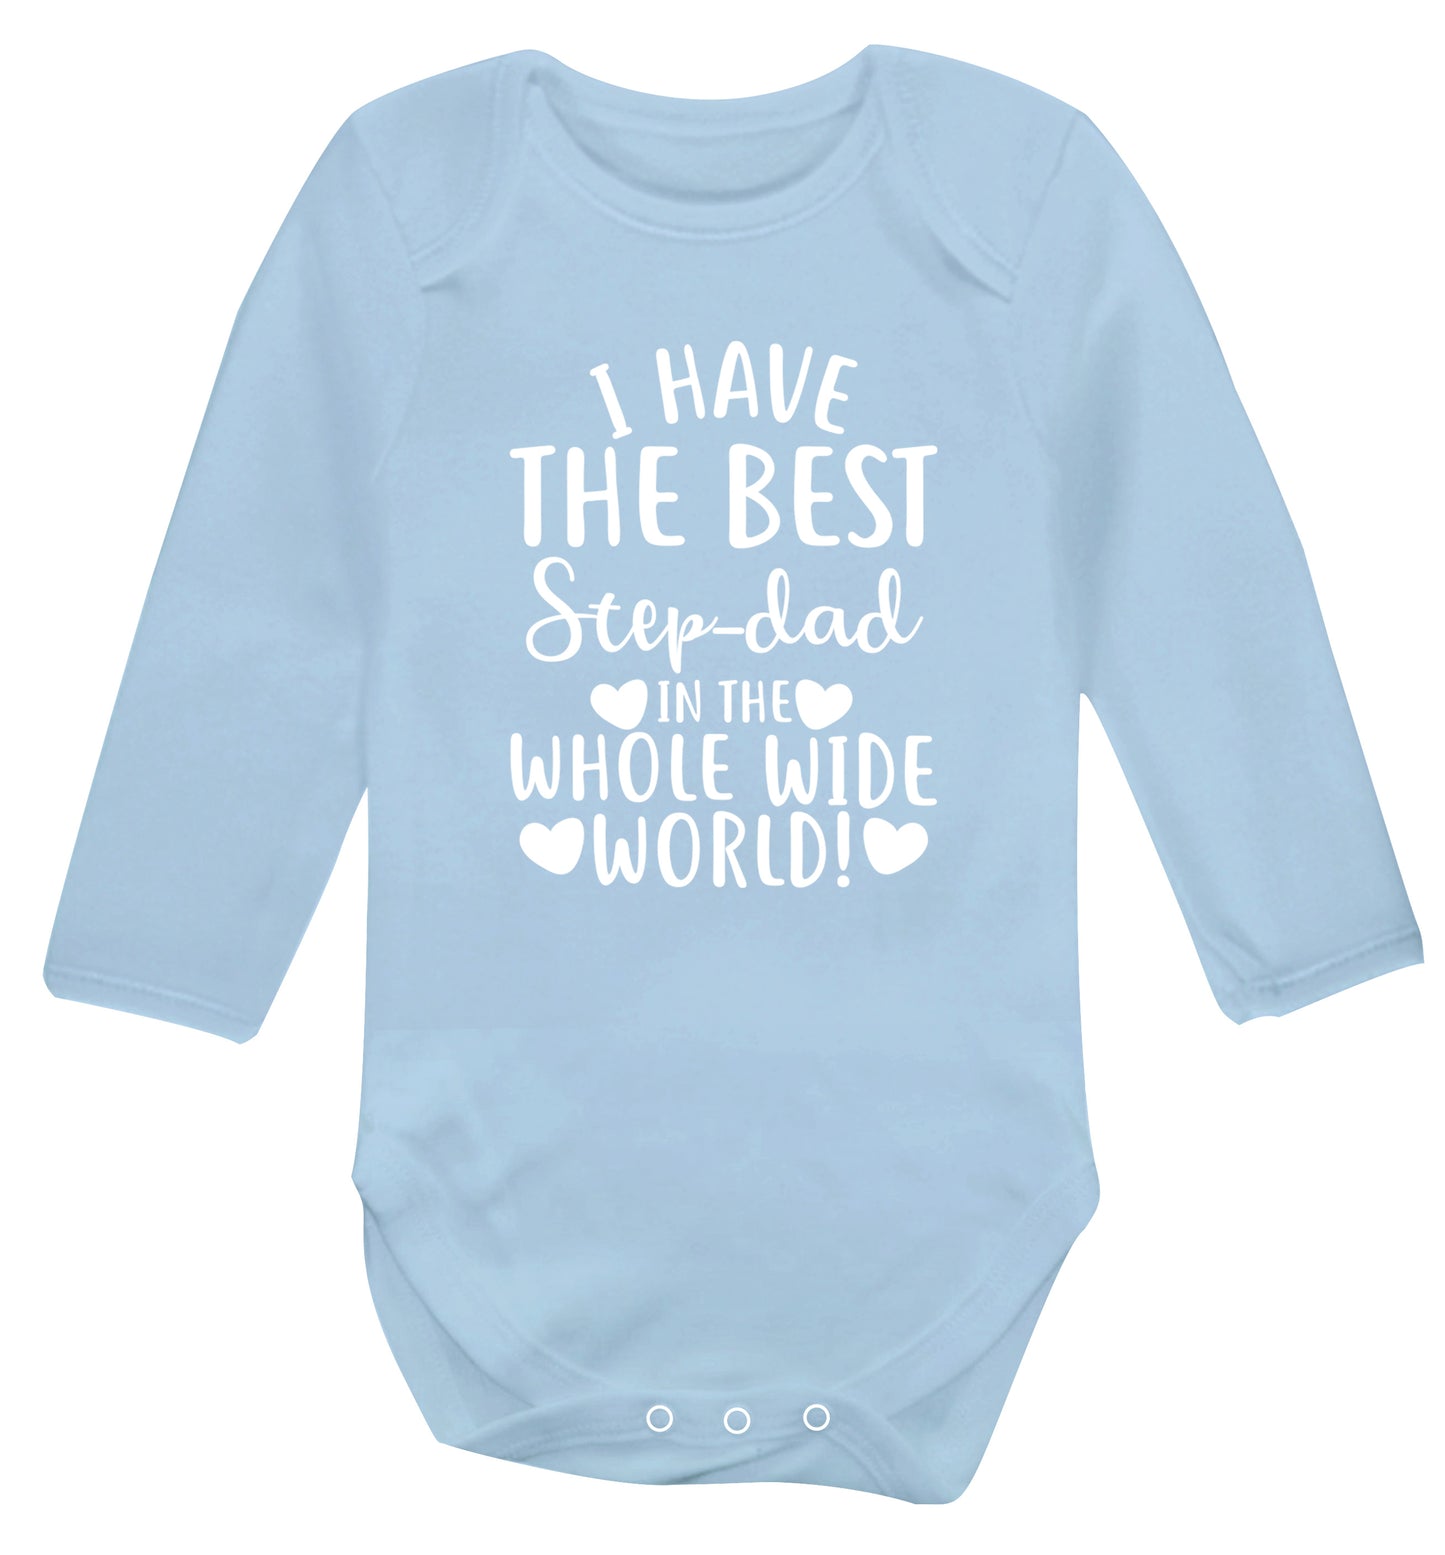 I have the best step-dad in the whole wide world! Baby Vest long sleeved pale blue 6-12 months